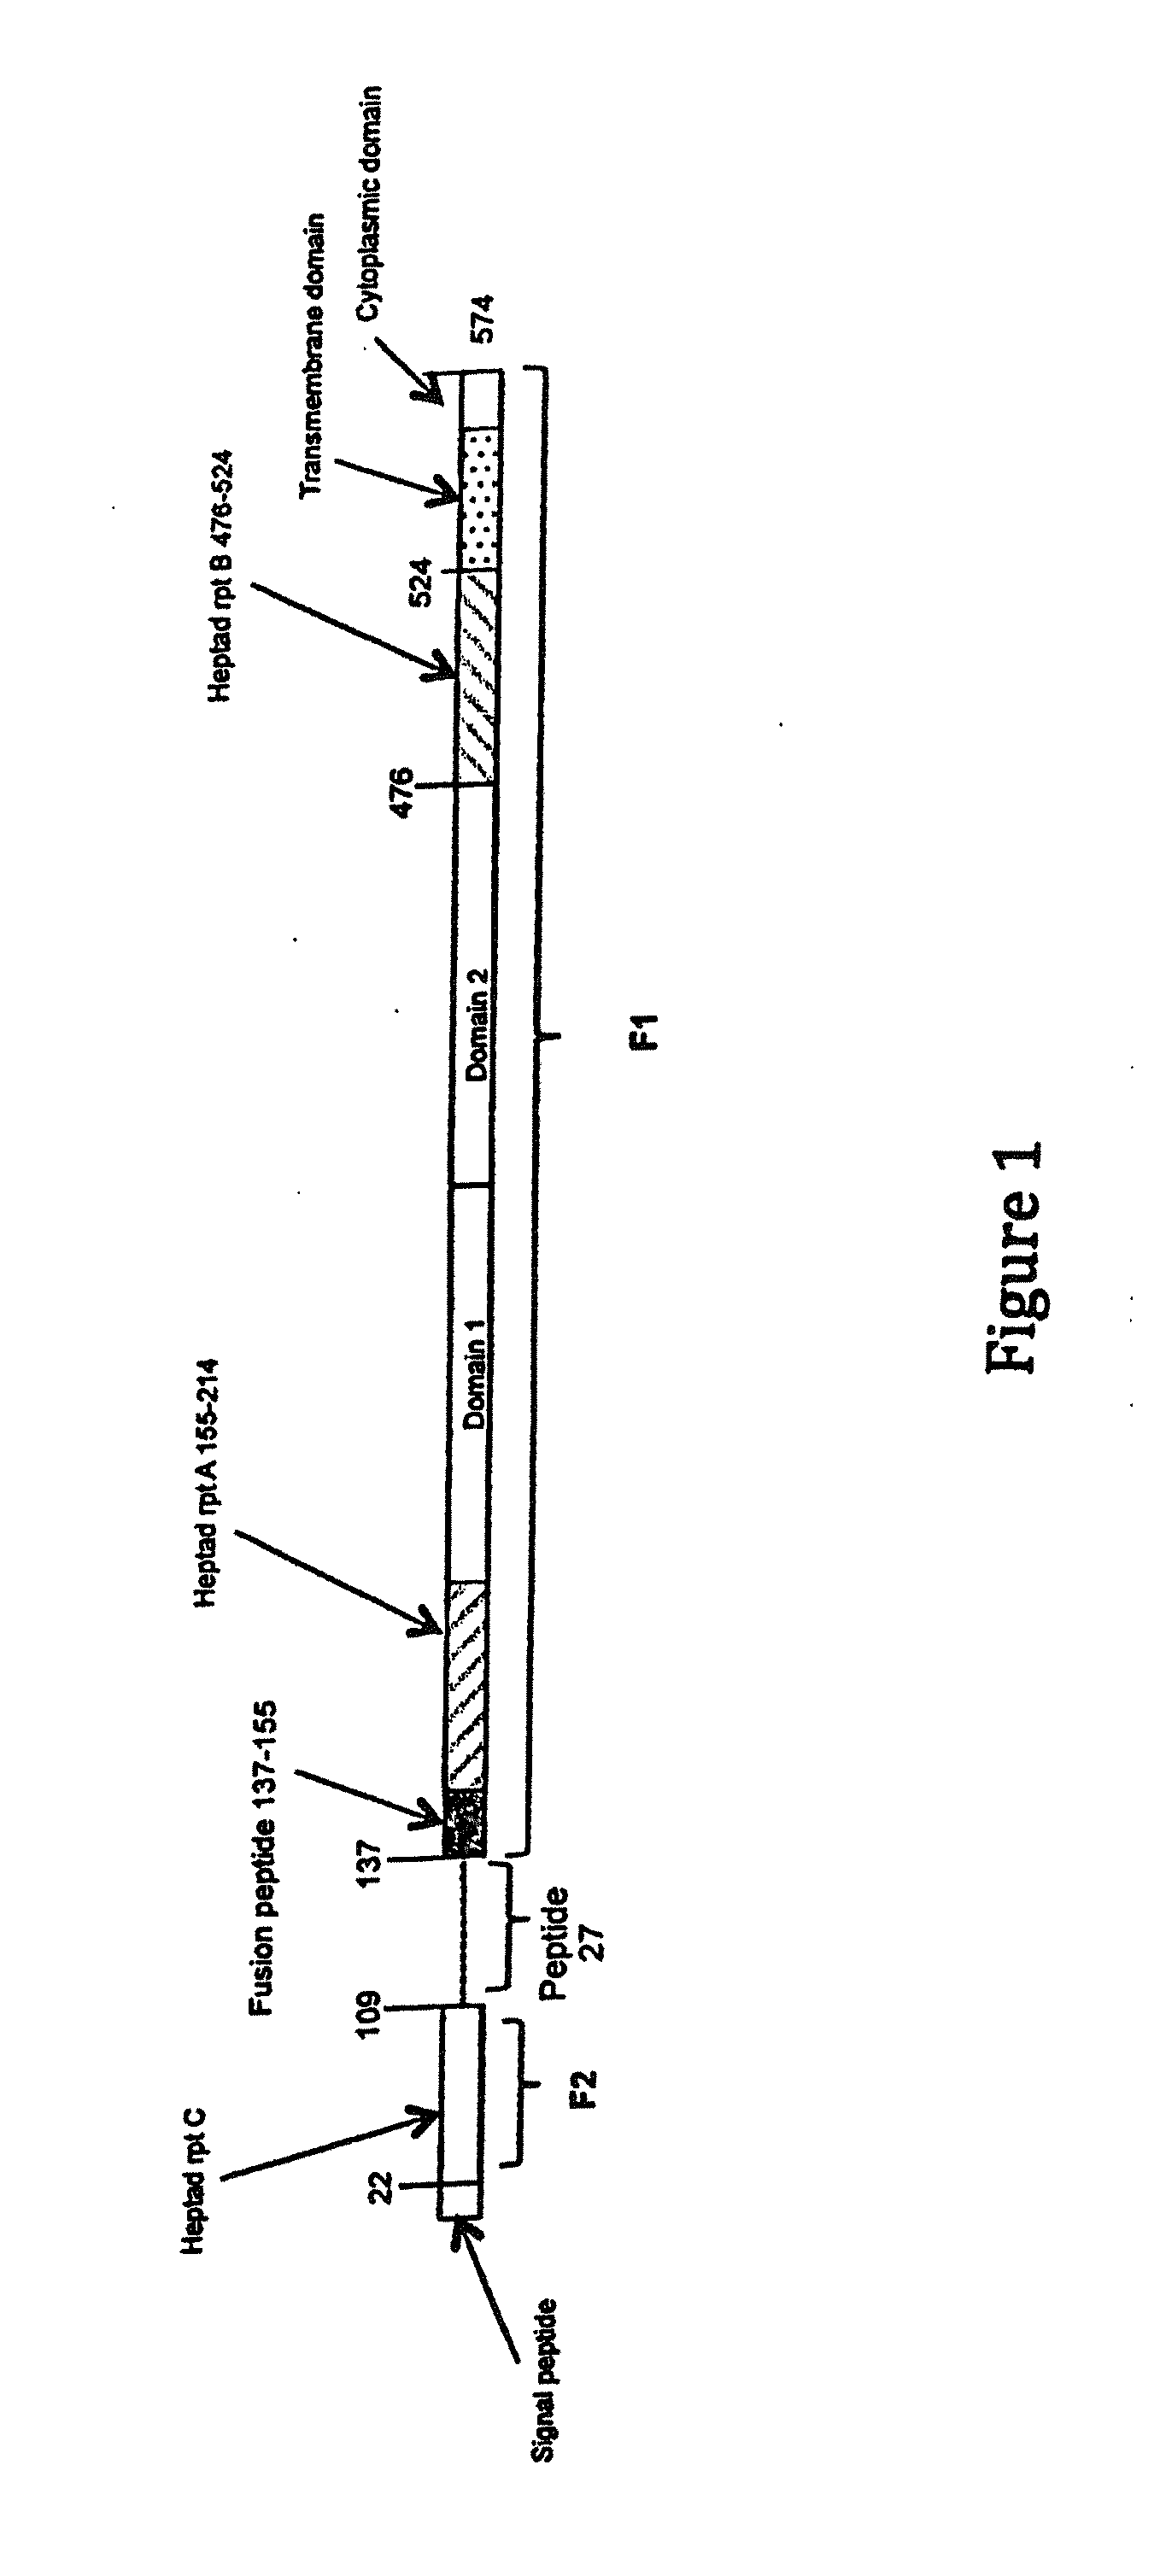 Human antibodies to respiratory syncytial virus f protein and methods of use thereof